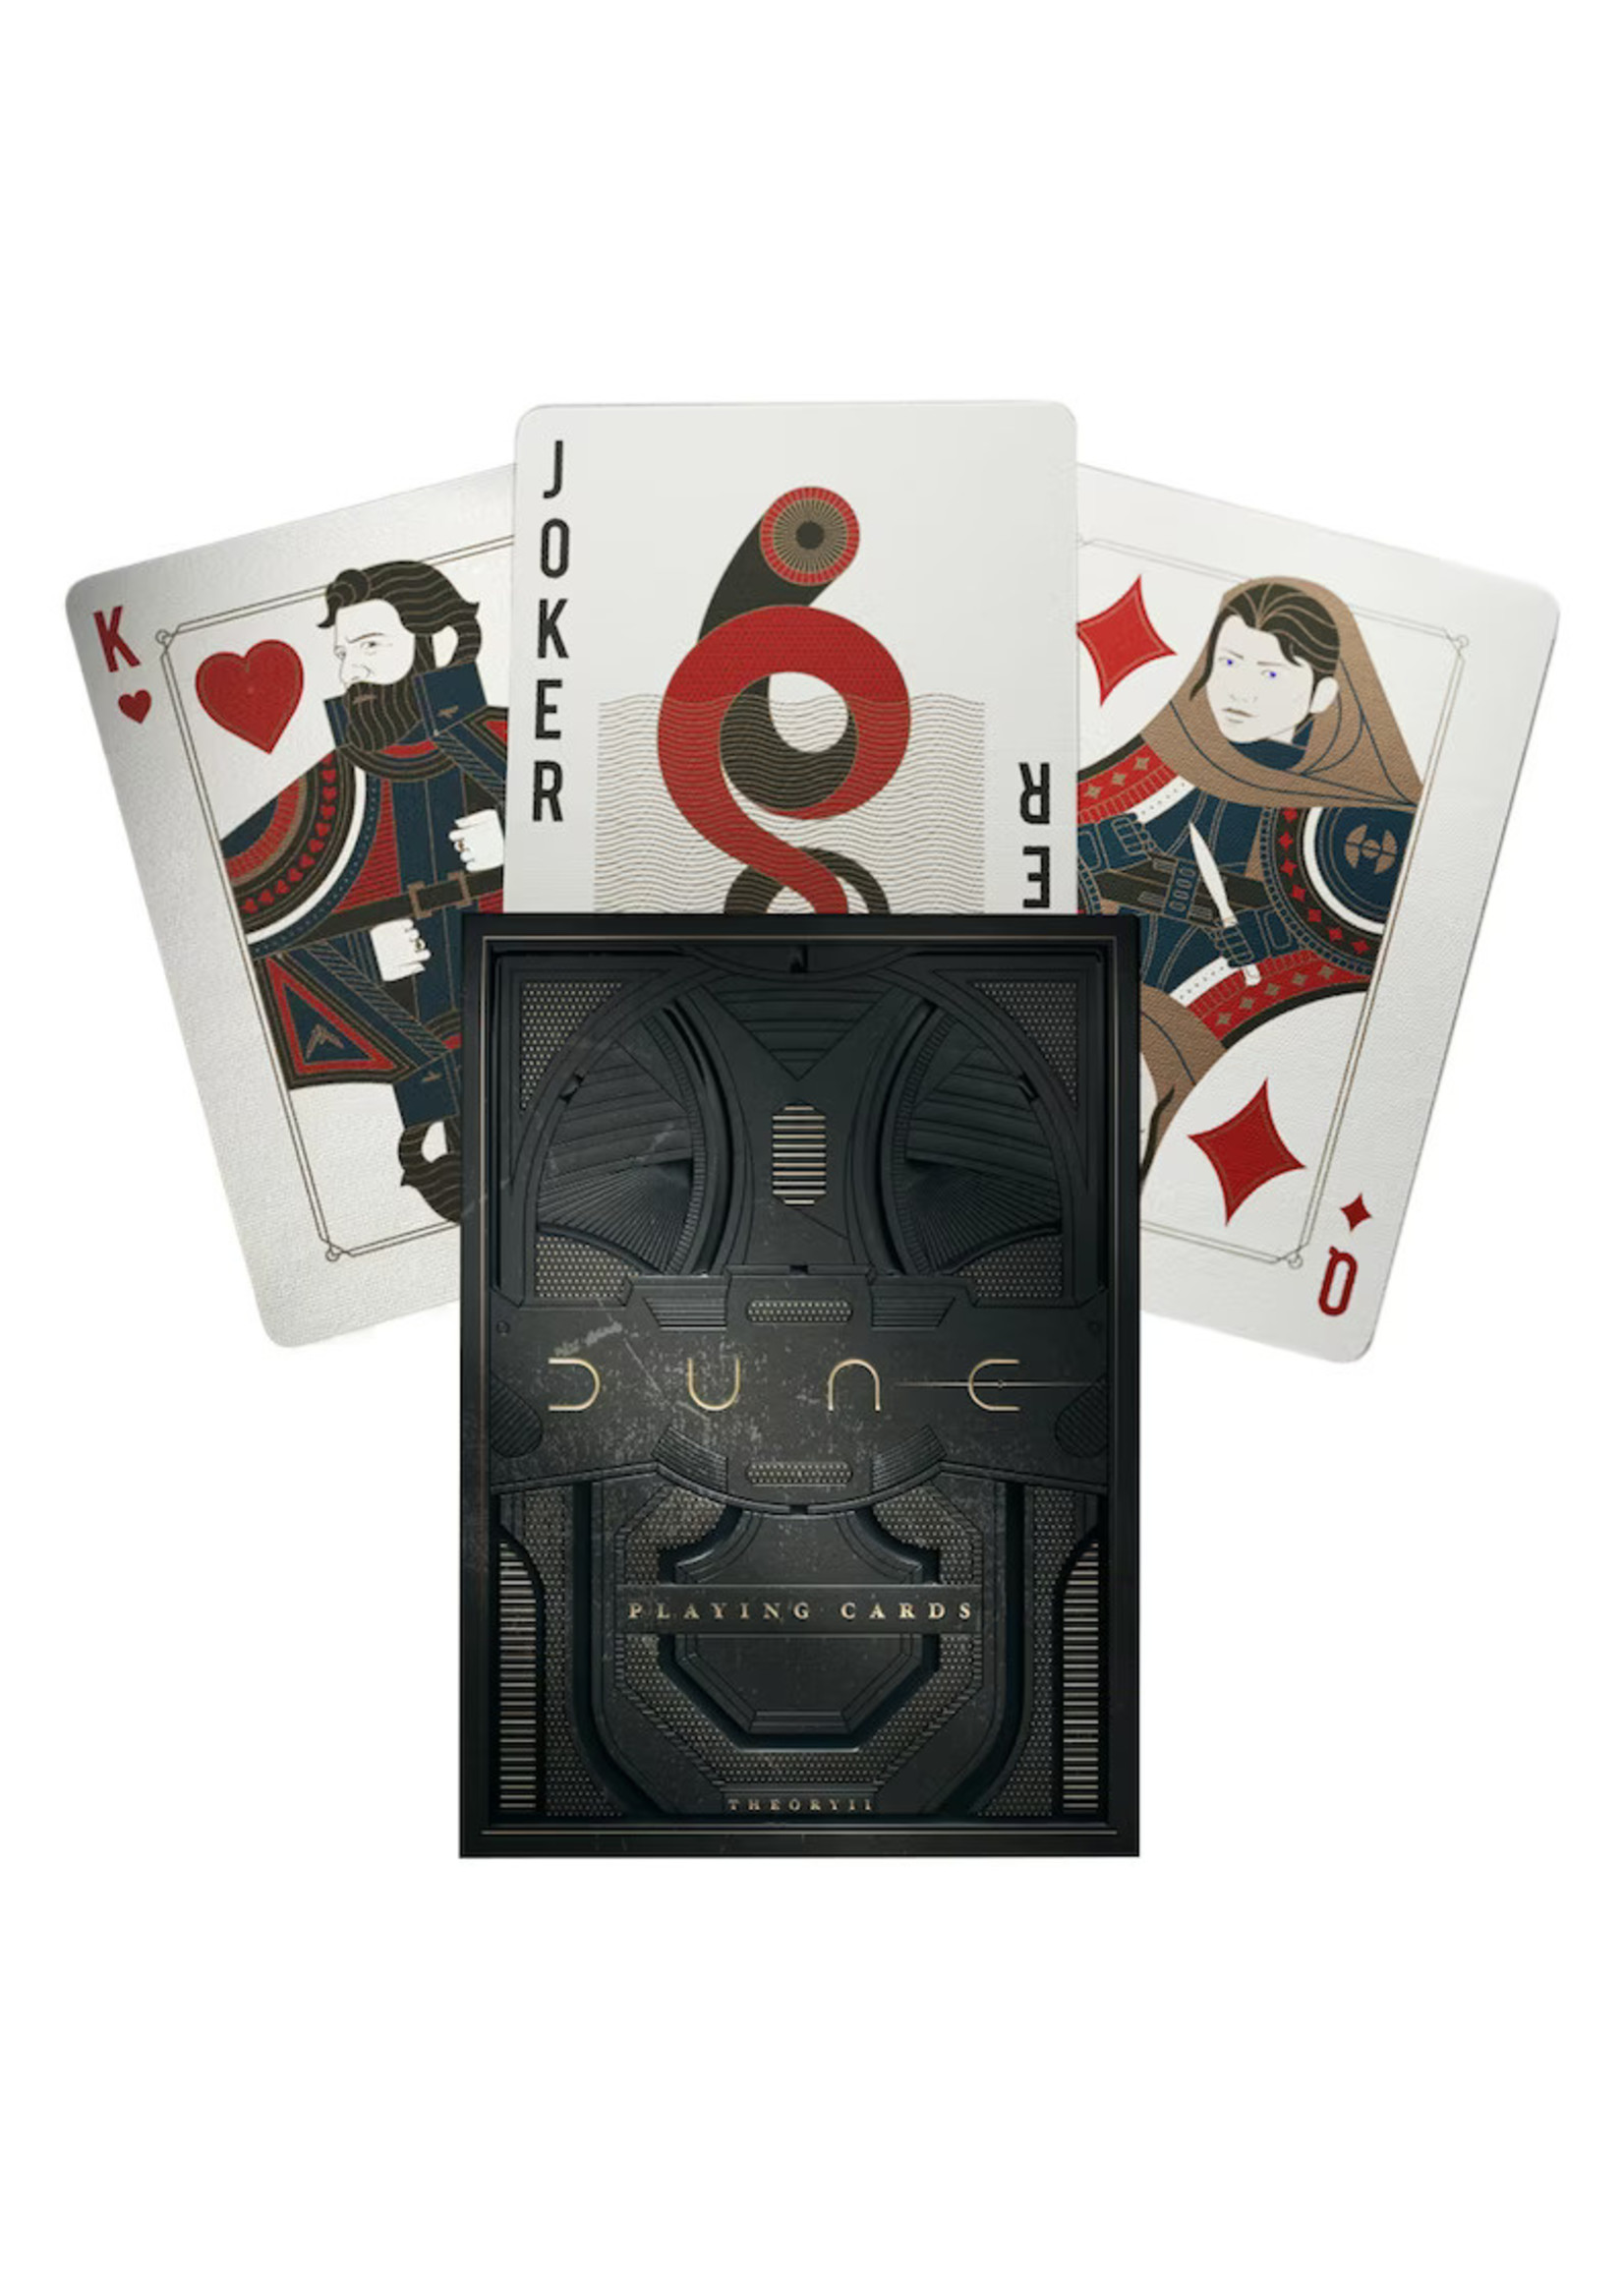 Theory11 Theory11: Dune Playing Cards